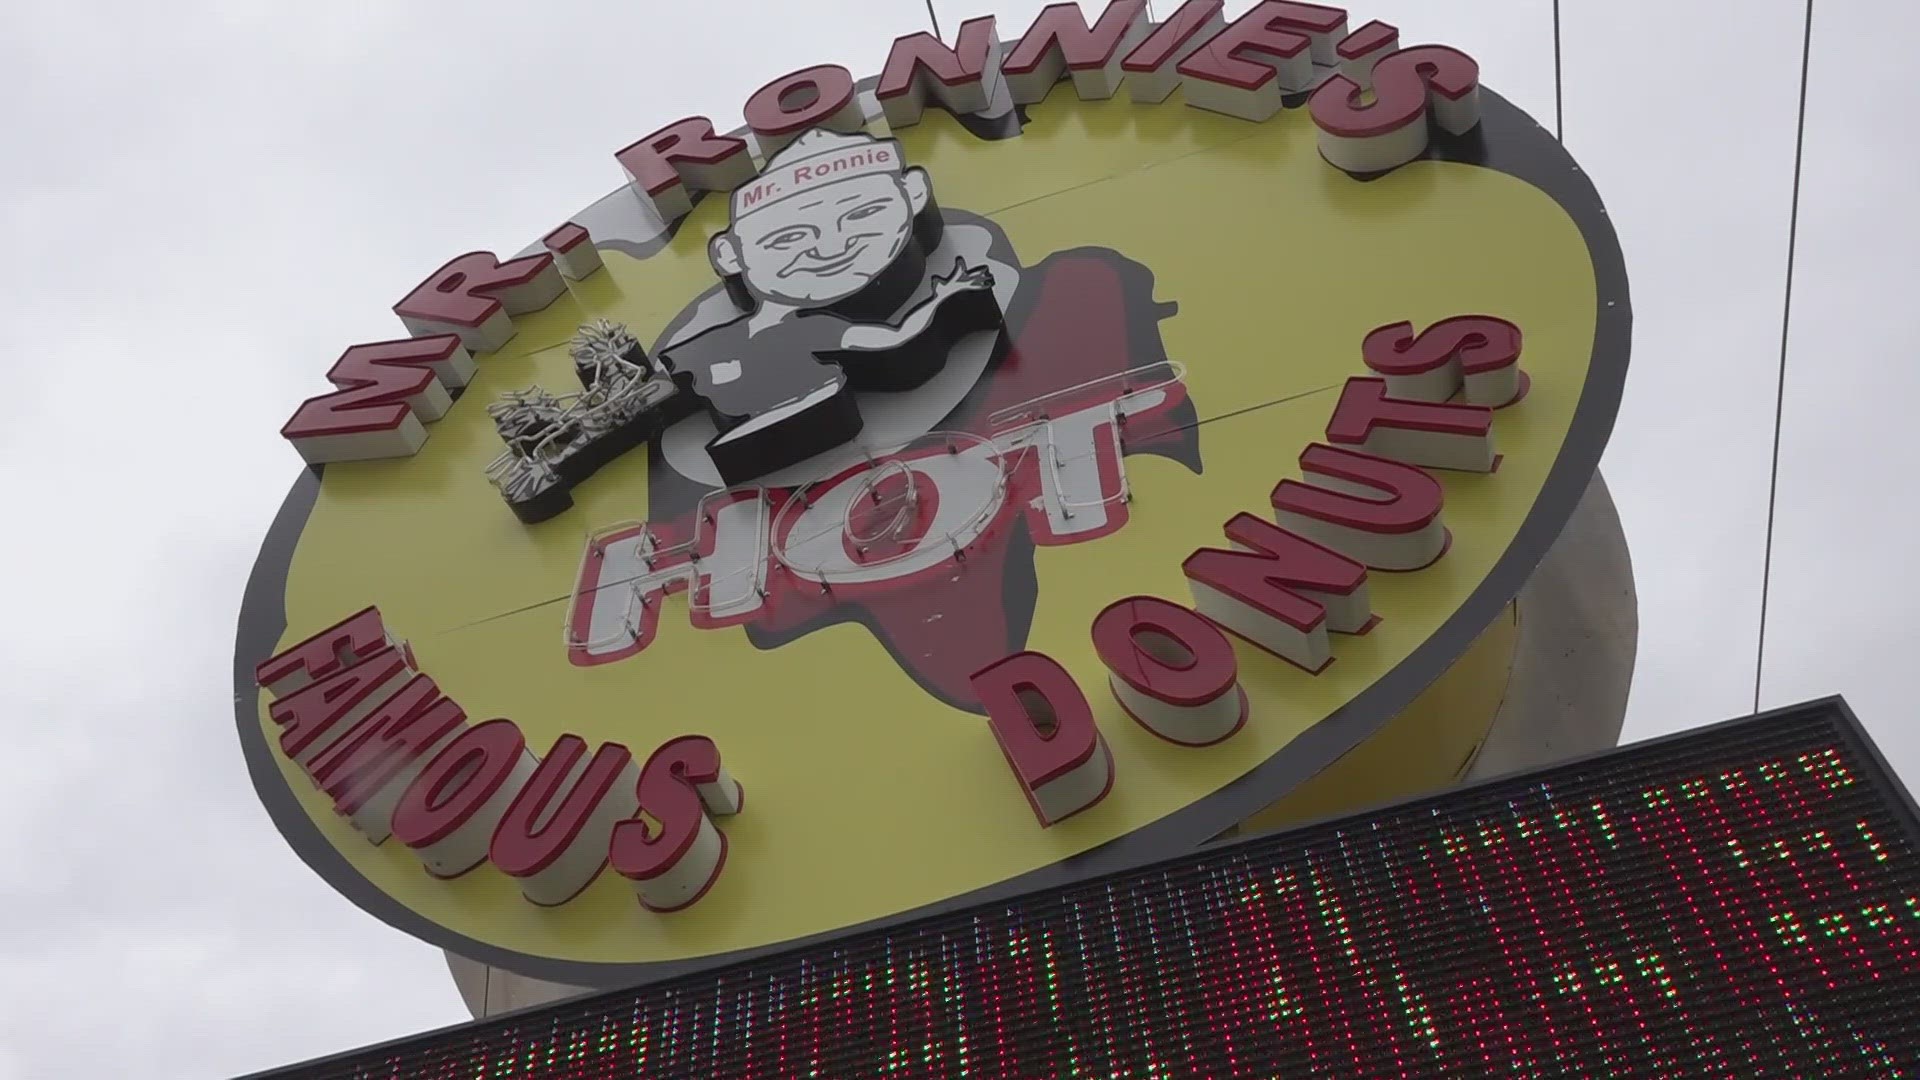 That sign was designed by Kellen Picou’s father, Ronnie Picou, who opened the store in 1994.